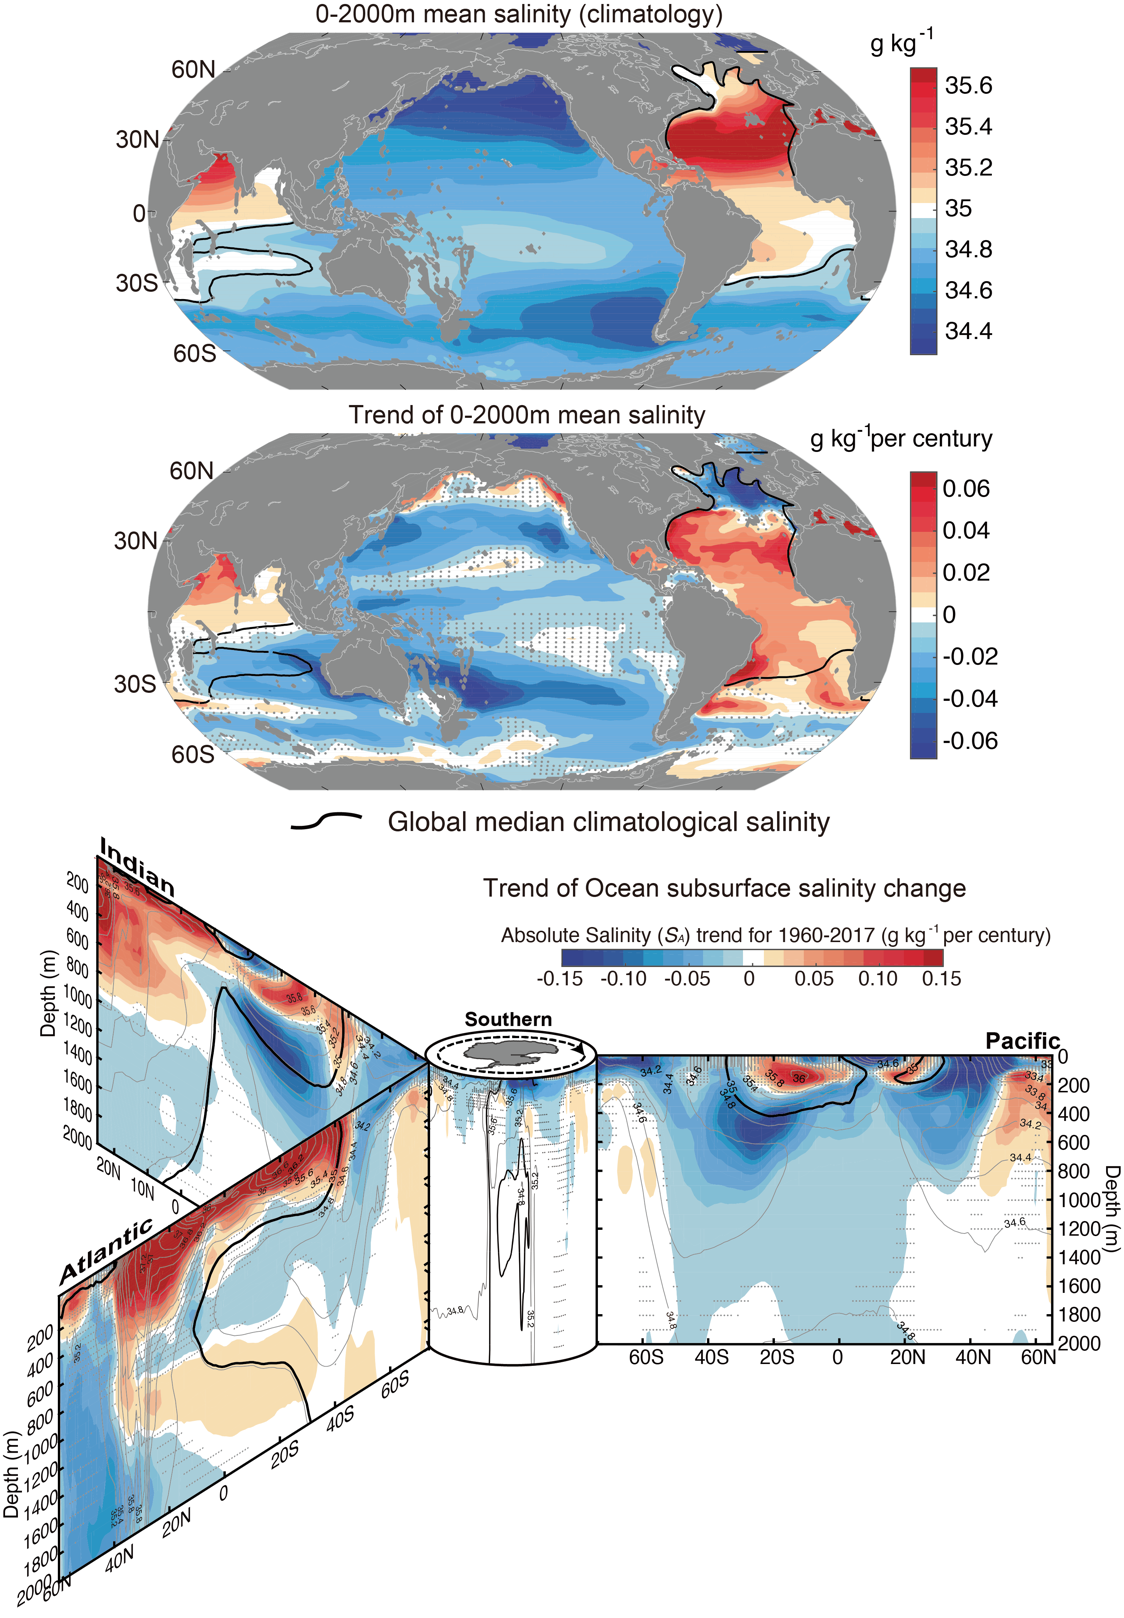 Enlarged view: Figure 2. 0-2000 mean salinity climatology (top) shows the relatively fresh Pacific versus the salty Atlantic northern Indian Ocean. Its long-term trend (middle) has a remarkably similar pattern. The zonal mean ocean salinity trends (bottom) since 1960 in each ocean basin, organized around the Southern Ocean in the center, depict the penetration of surface anomalies into the ocean subsurface.